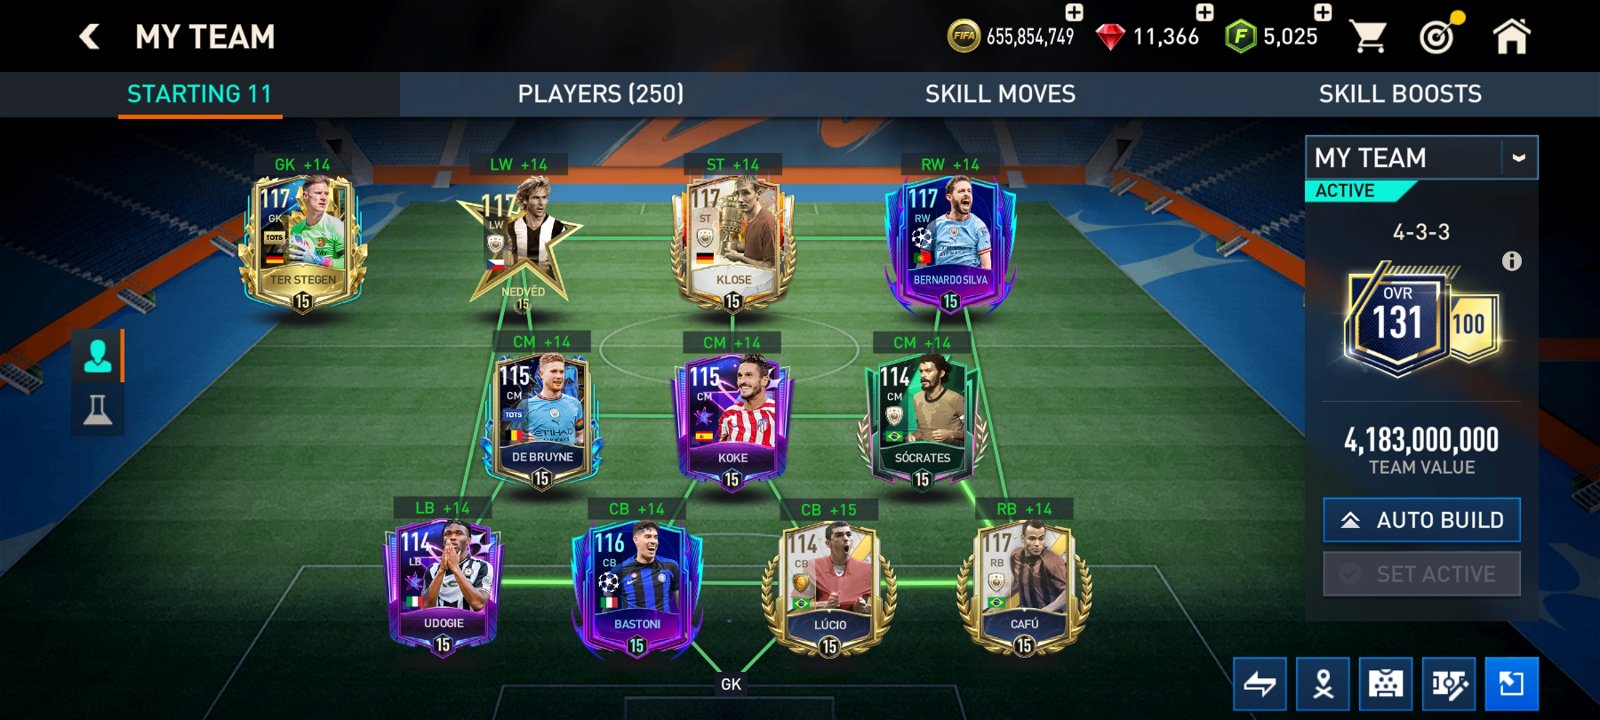 Sell fifa mobile 21 account with 164 grl and 444 chemistry and 20